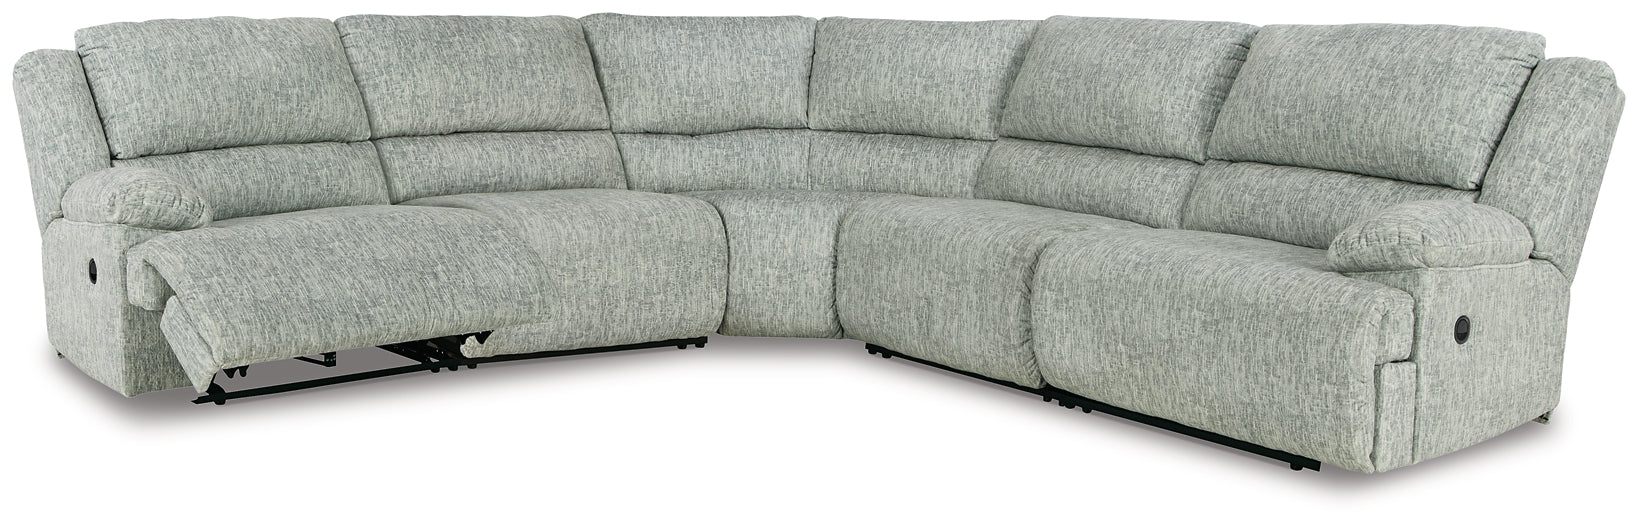 McClelland 5-Piece Reclining Sectional Rent Wise Rent To Own Jacksonville, Florida